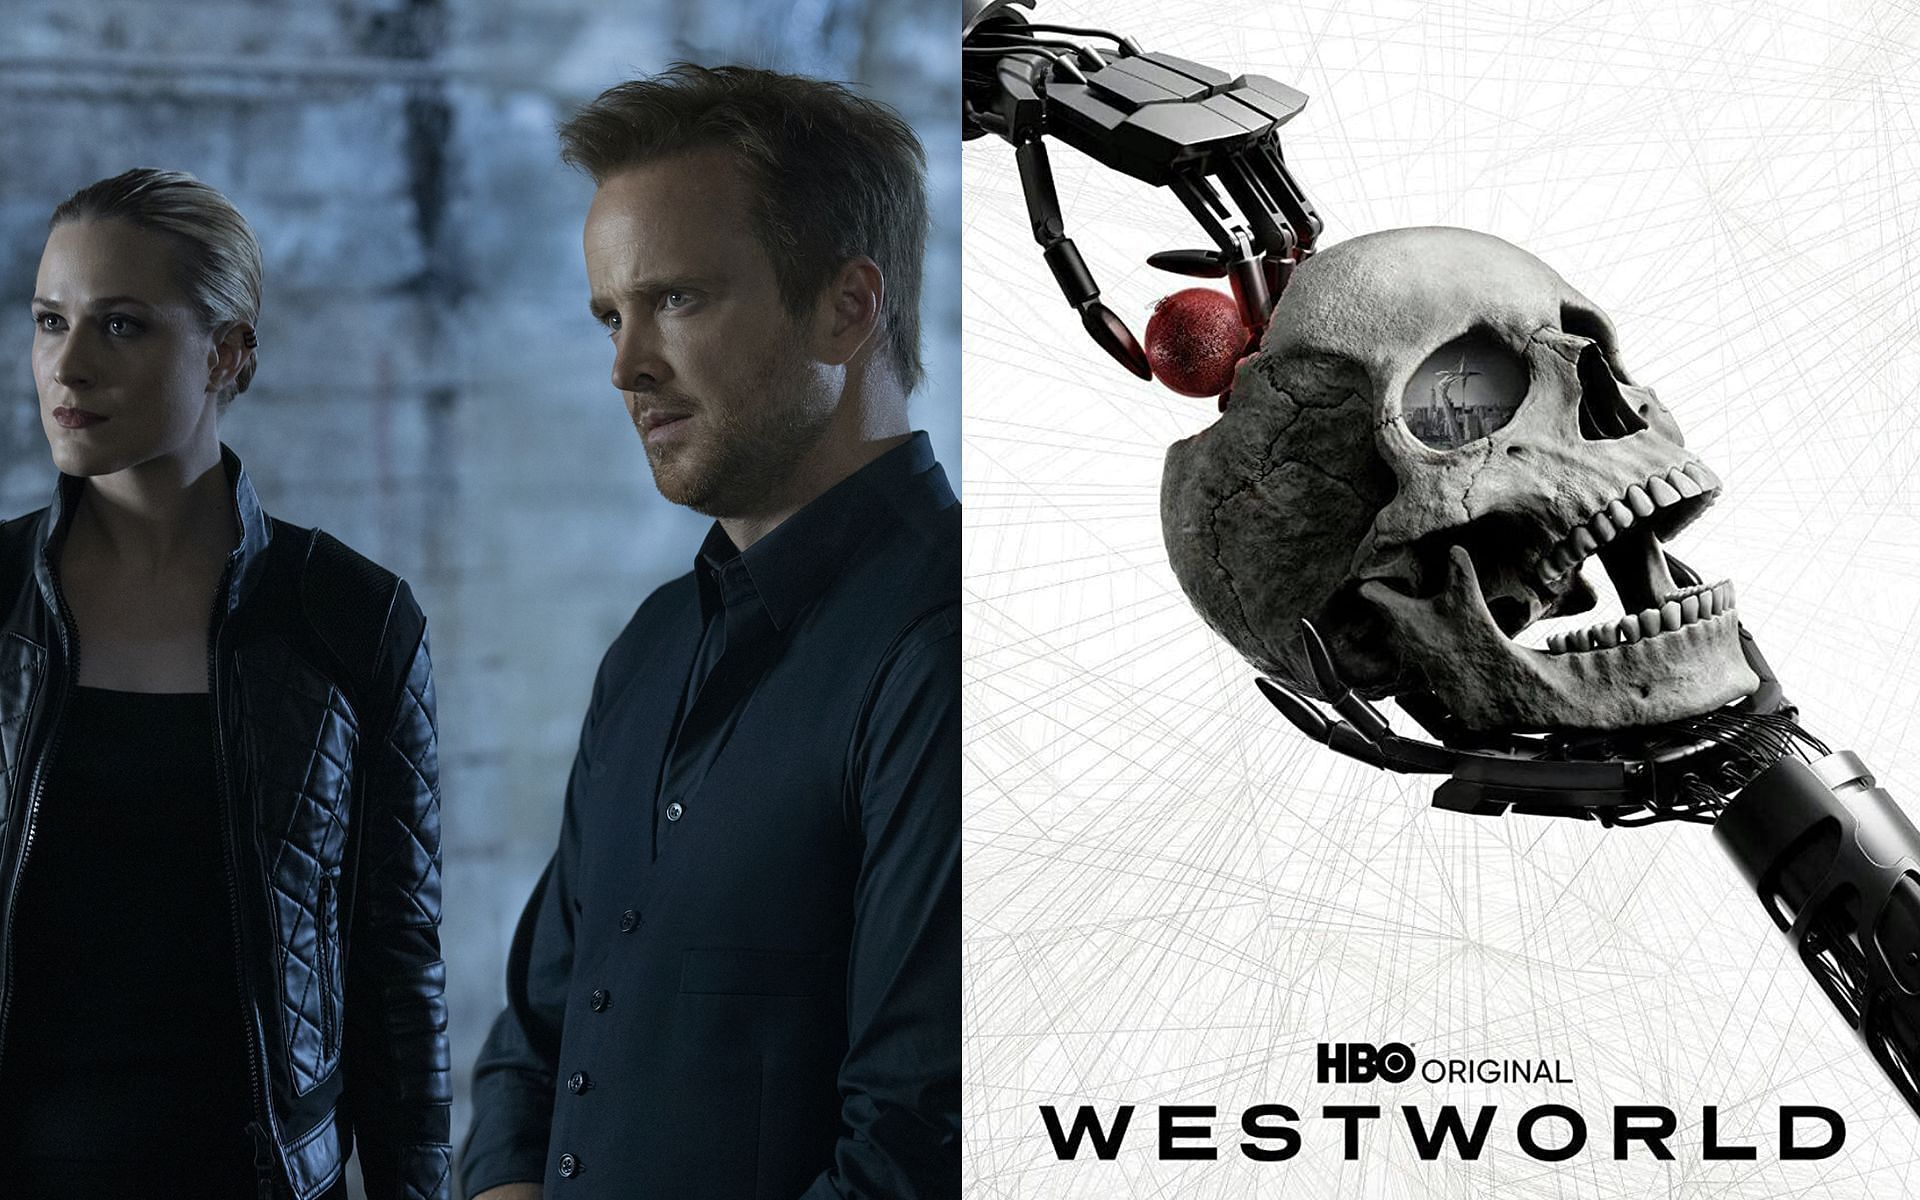 A still from Westworld and the official poster of the series (Images via IMDb)